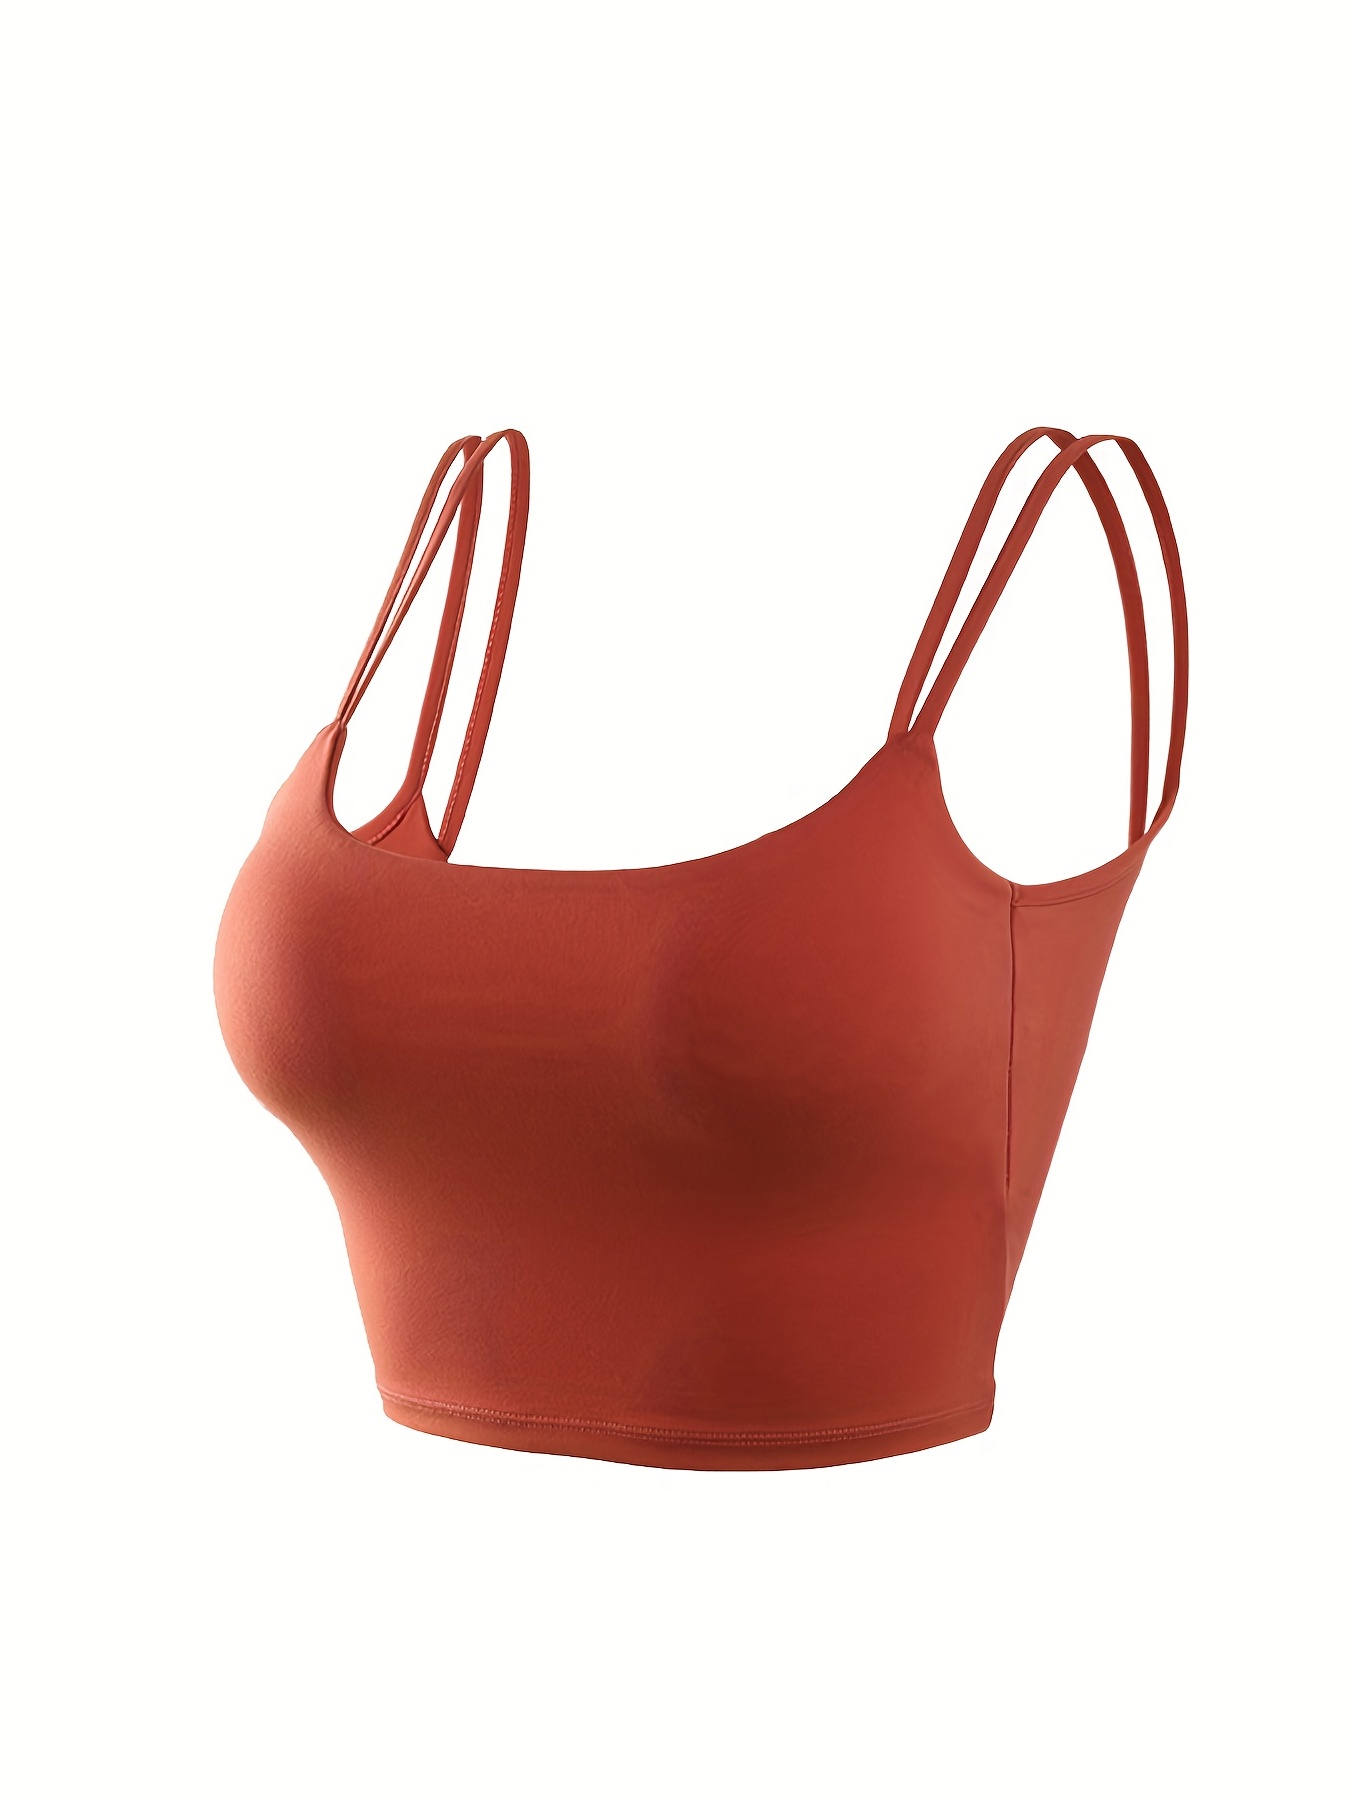  Backless Workout Tops For Women Twist Back Sports Bras  Padded Strappy Yoga Clothes Built In Bra Red S